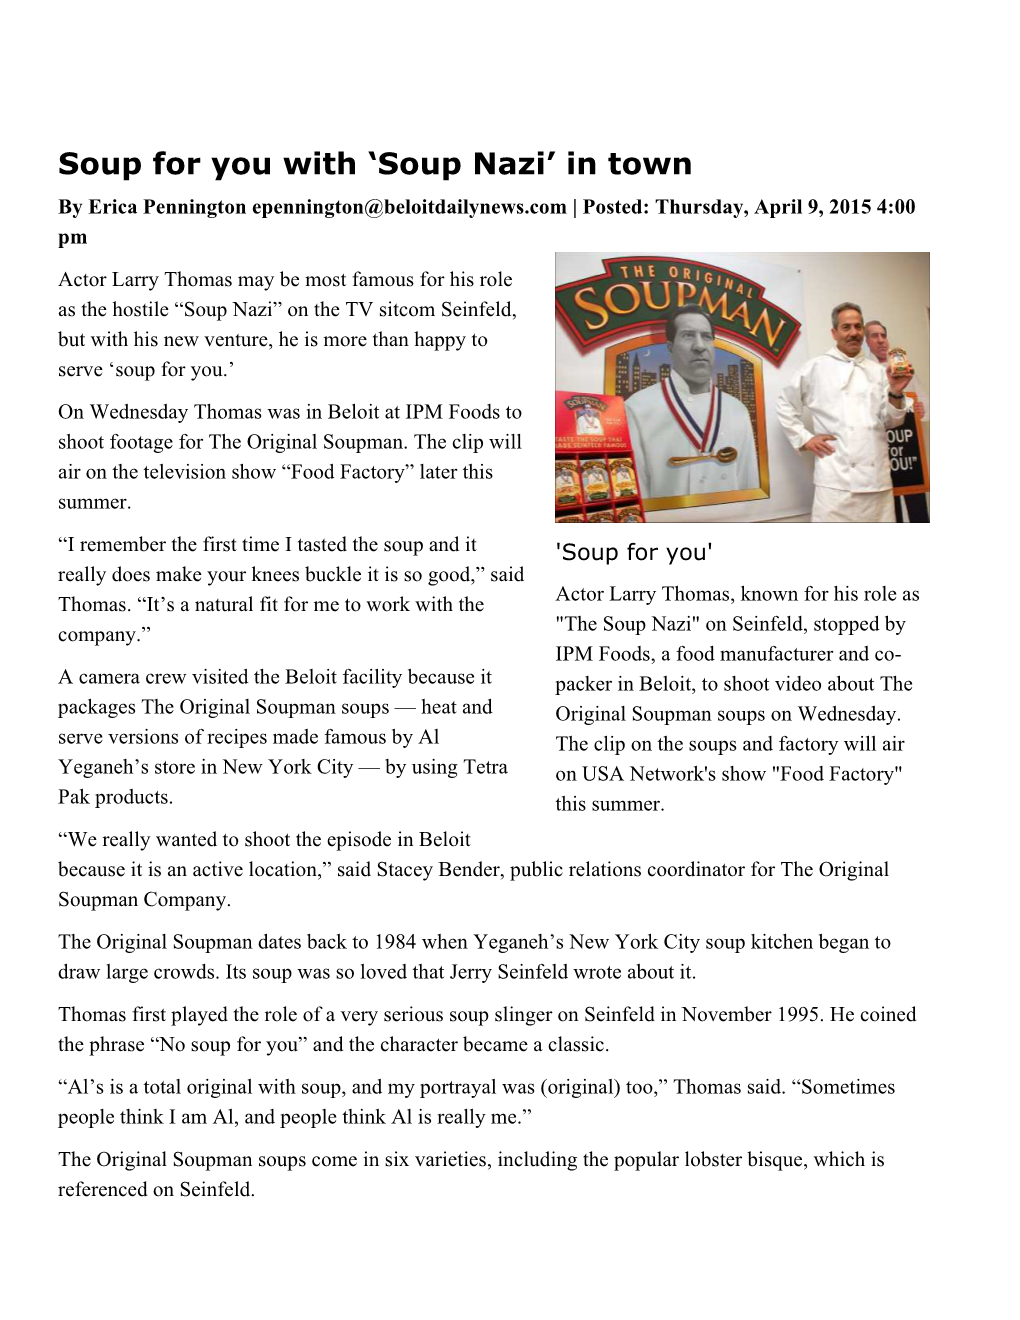 Soup Nazi’ in Town by Erica Pennington Epennington@Beloitdailynews.Com | Posted: Thursday, April 9, 2015 4:00 Pm